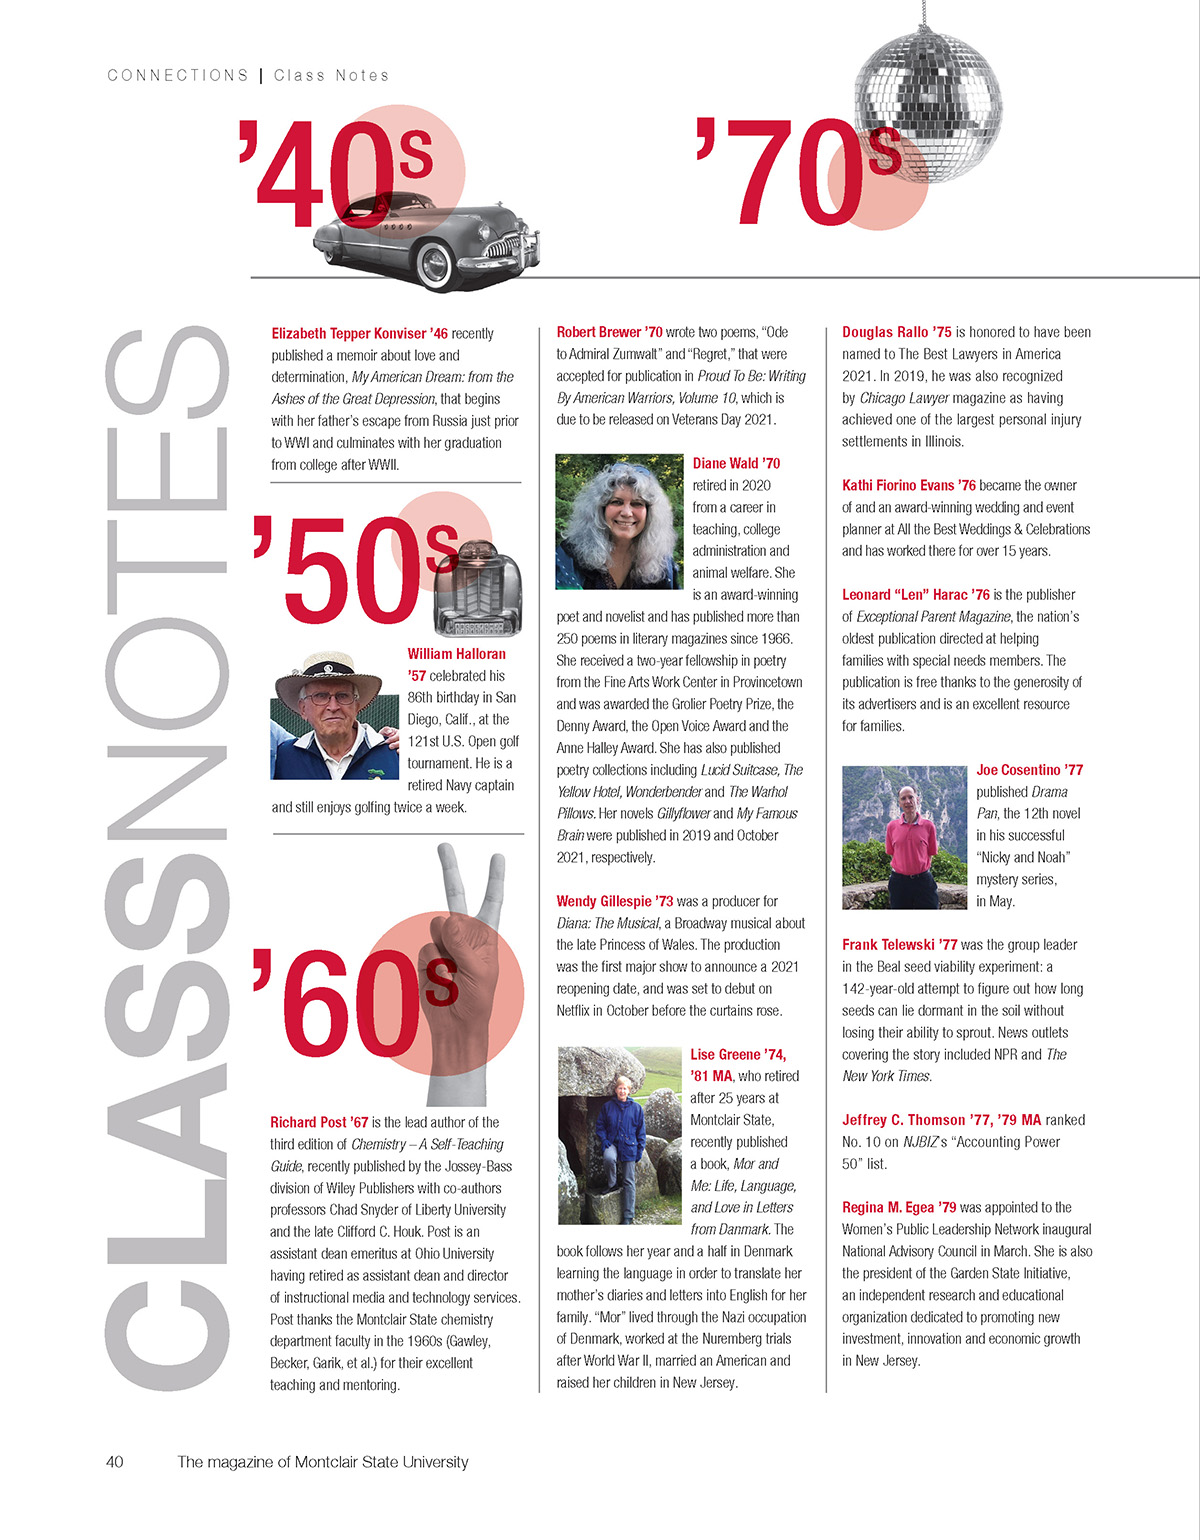 Class notes page from magazine